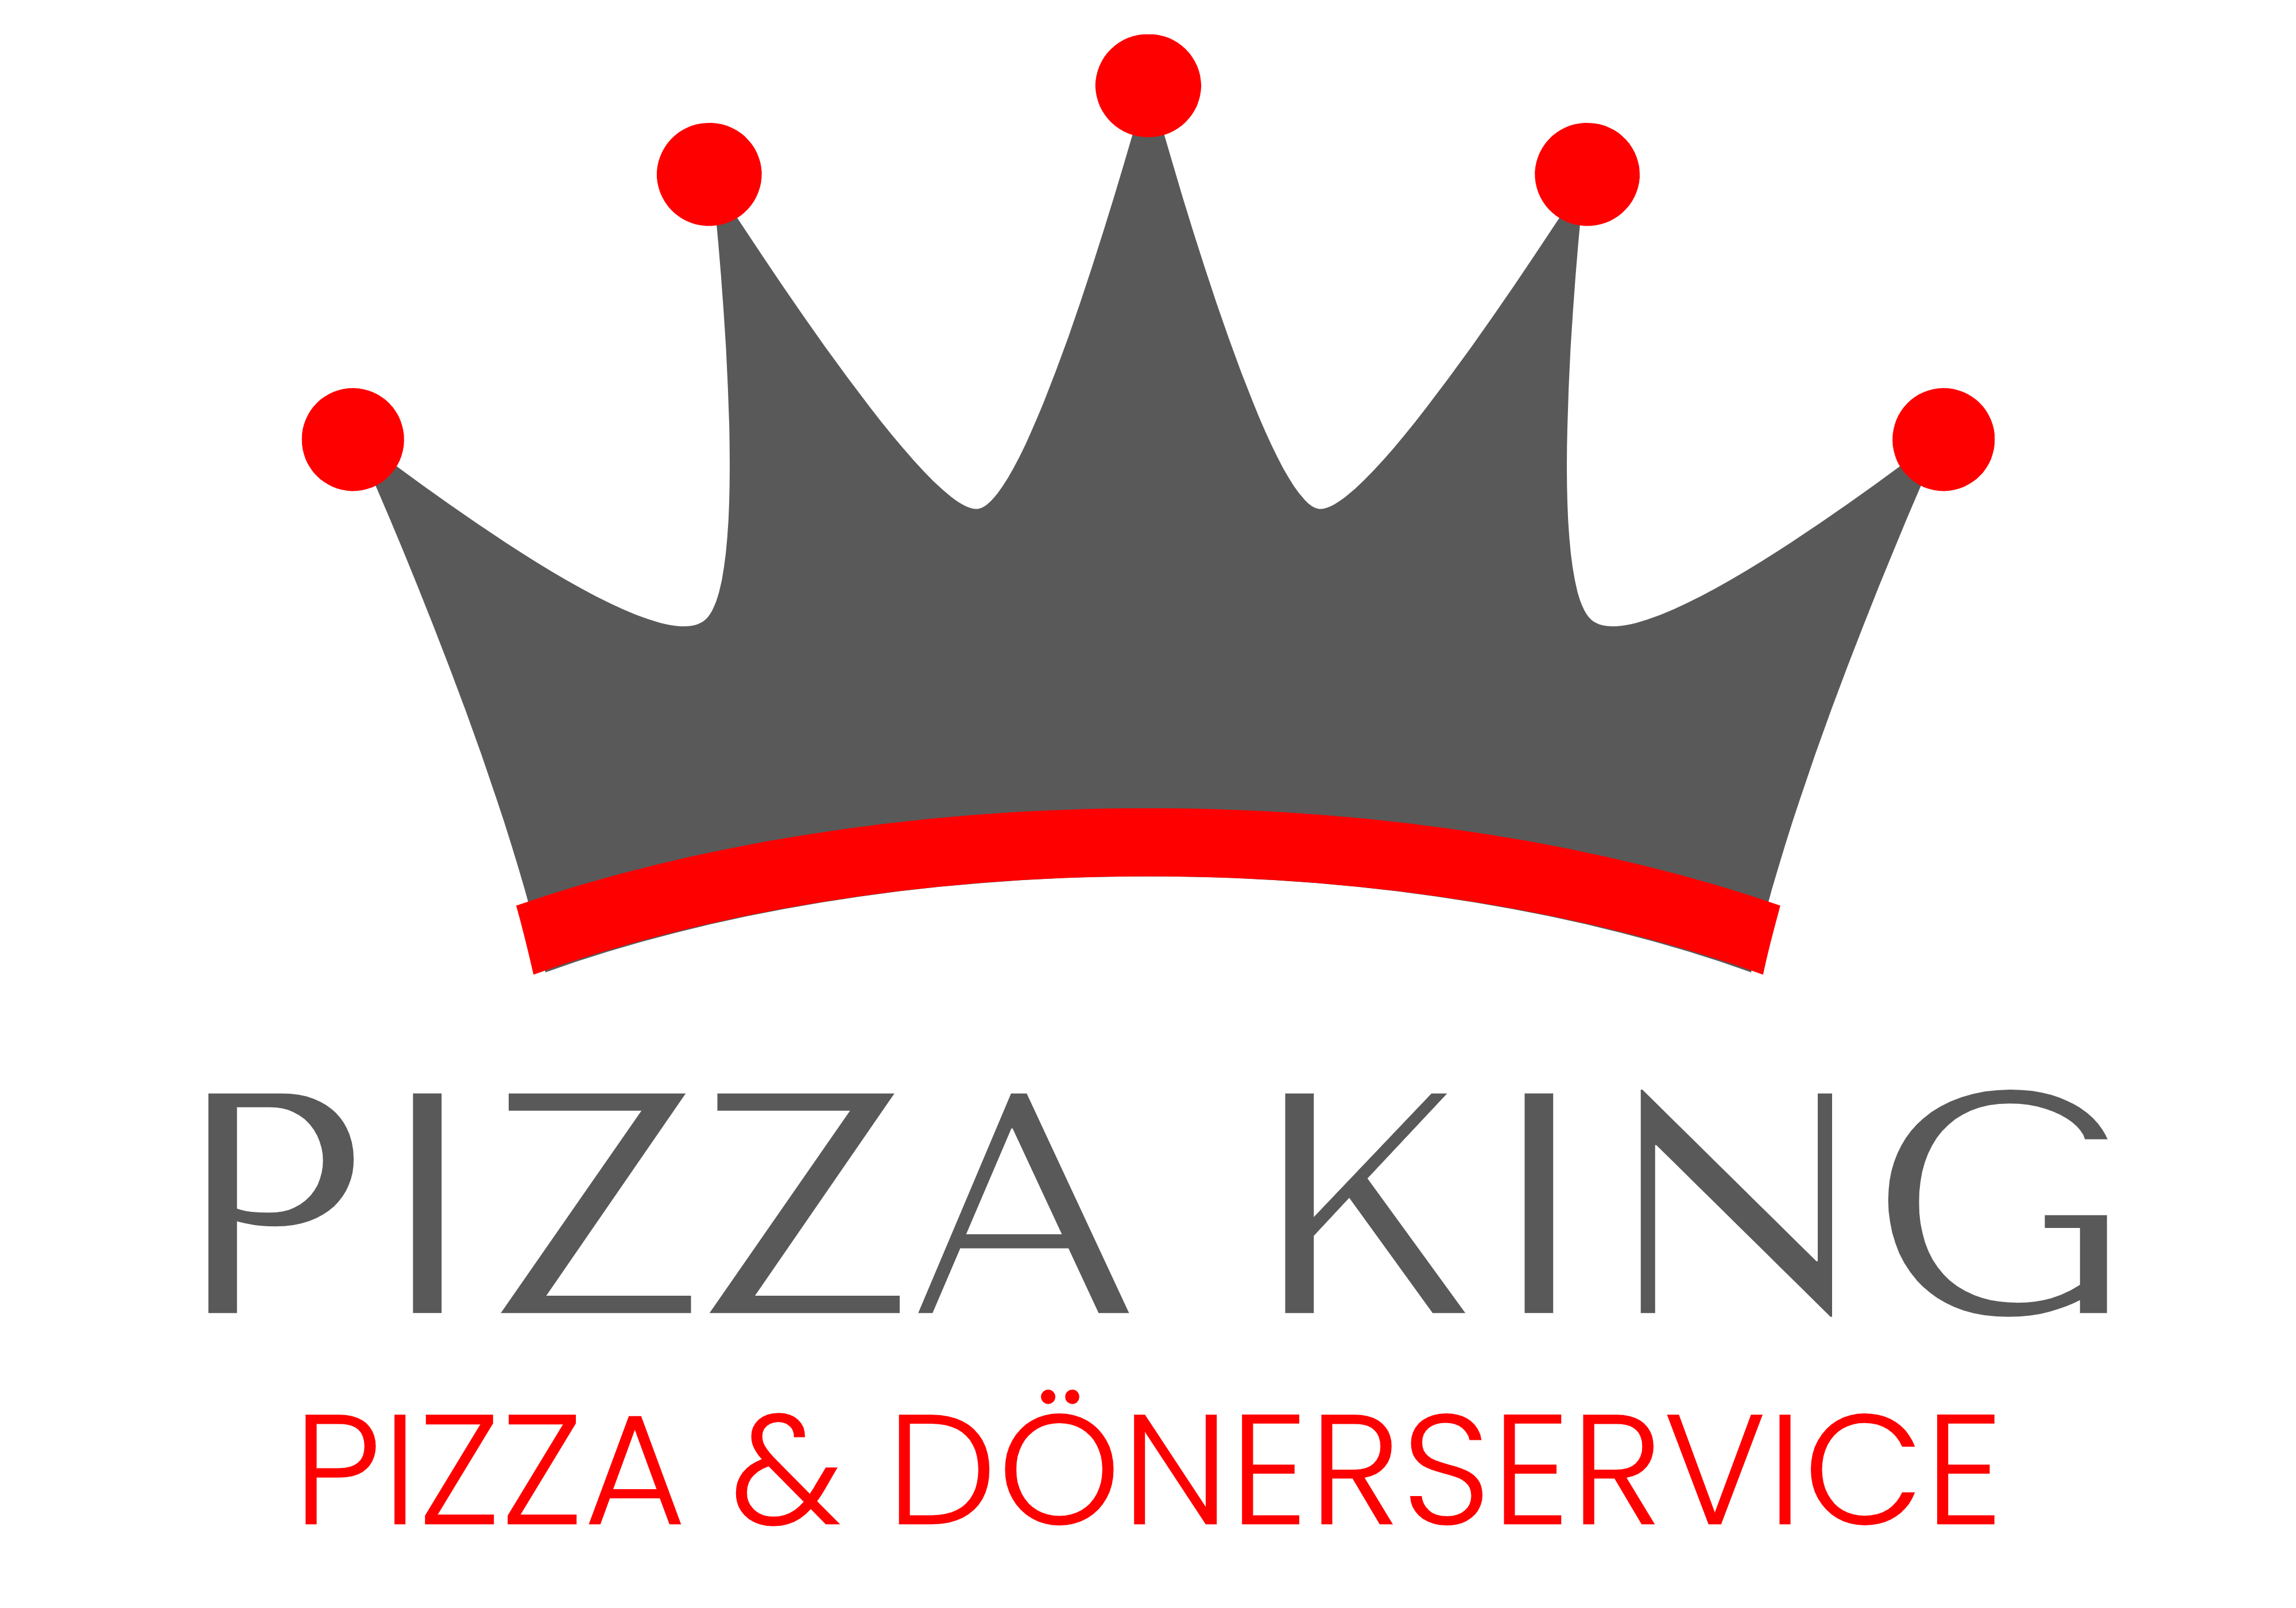 King Pizzaservice